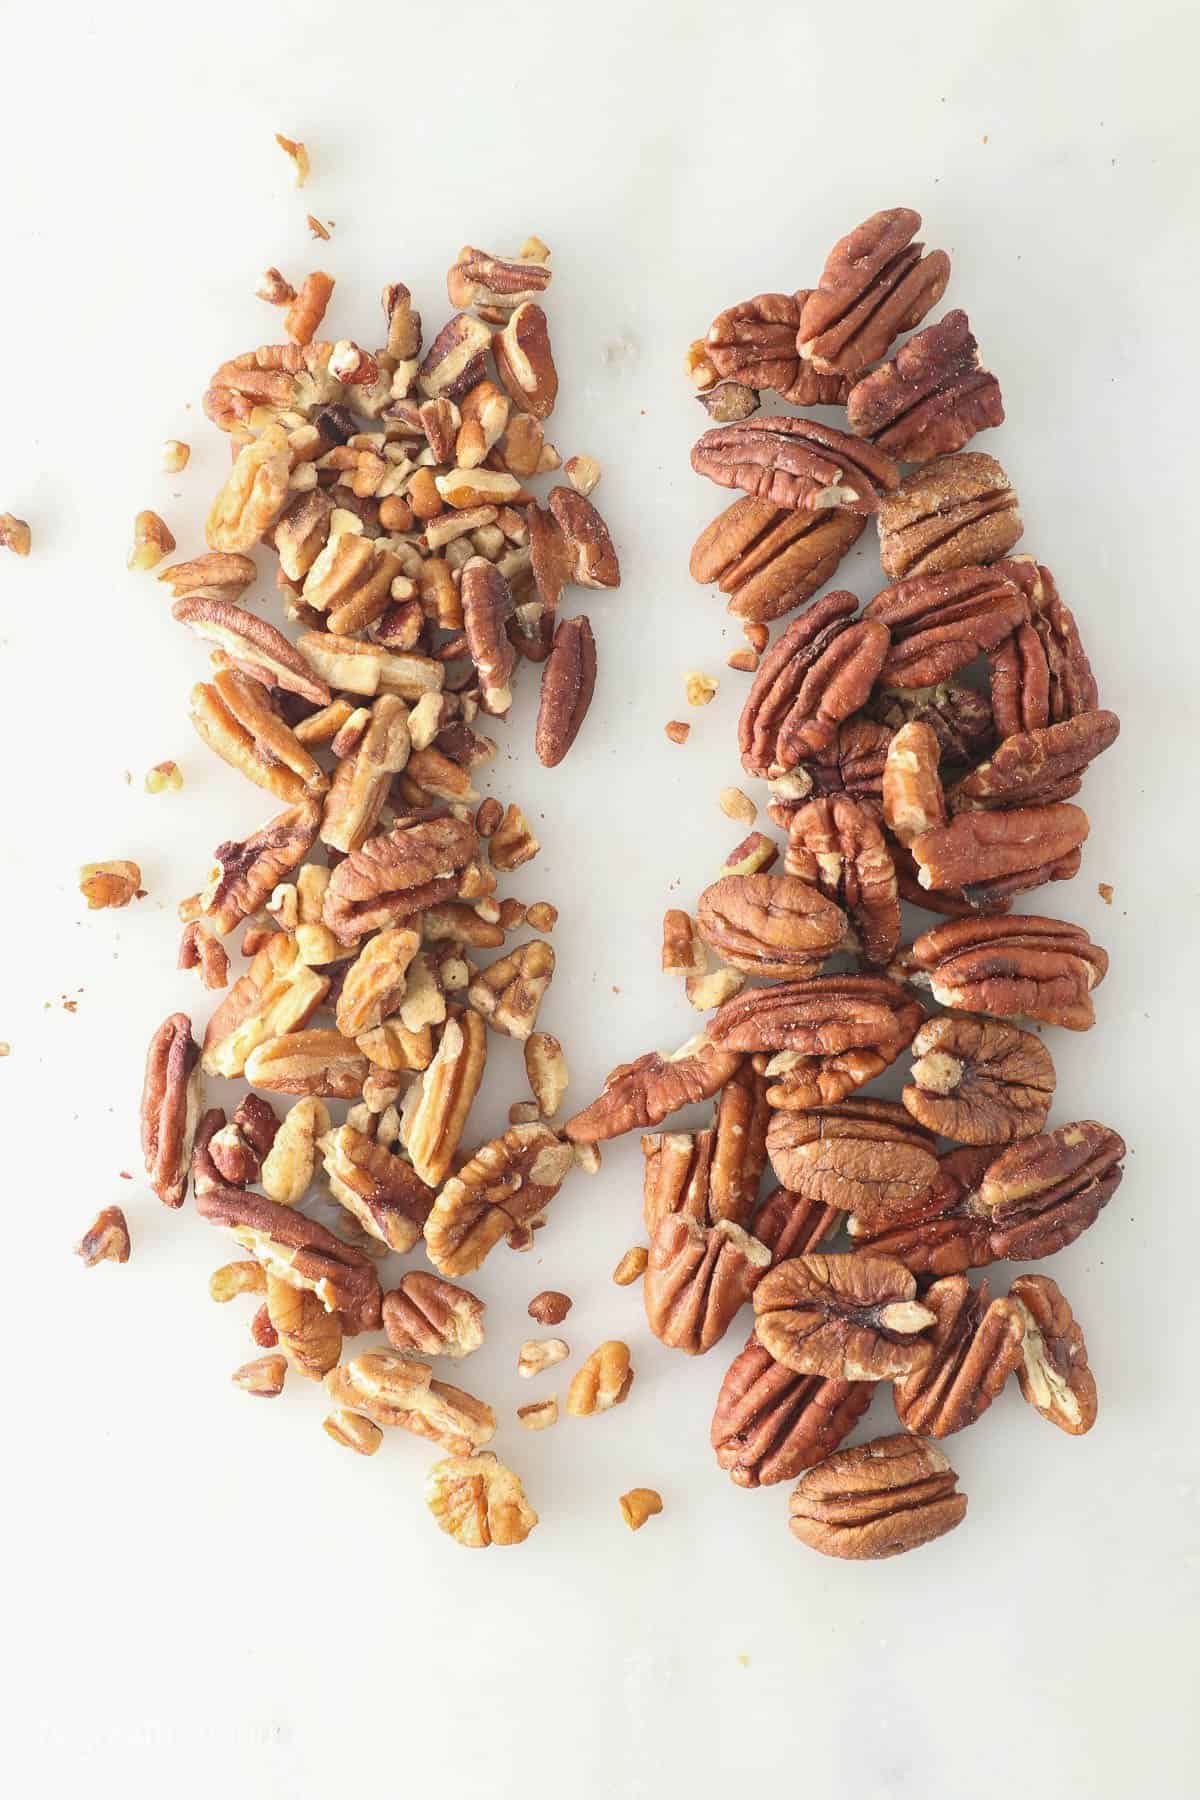 Chopped pecans on a white surface beside whole pecans